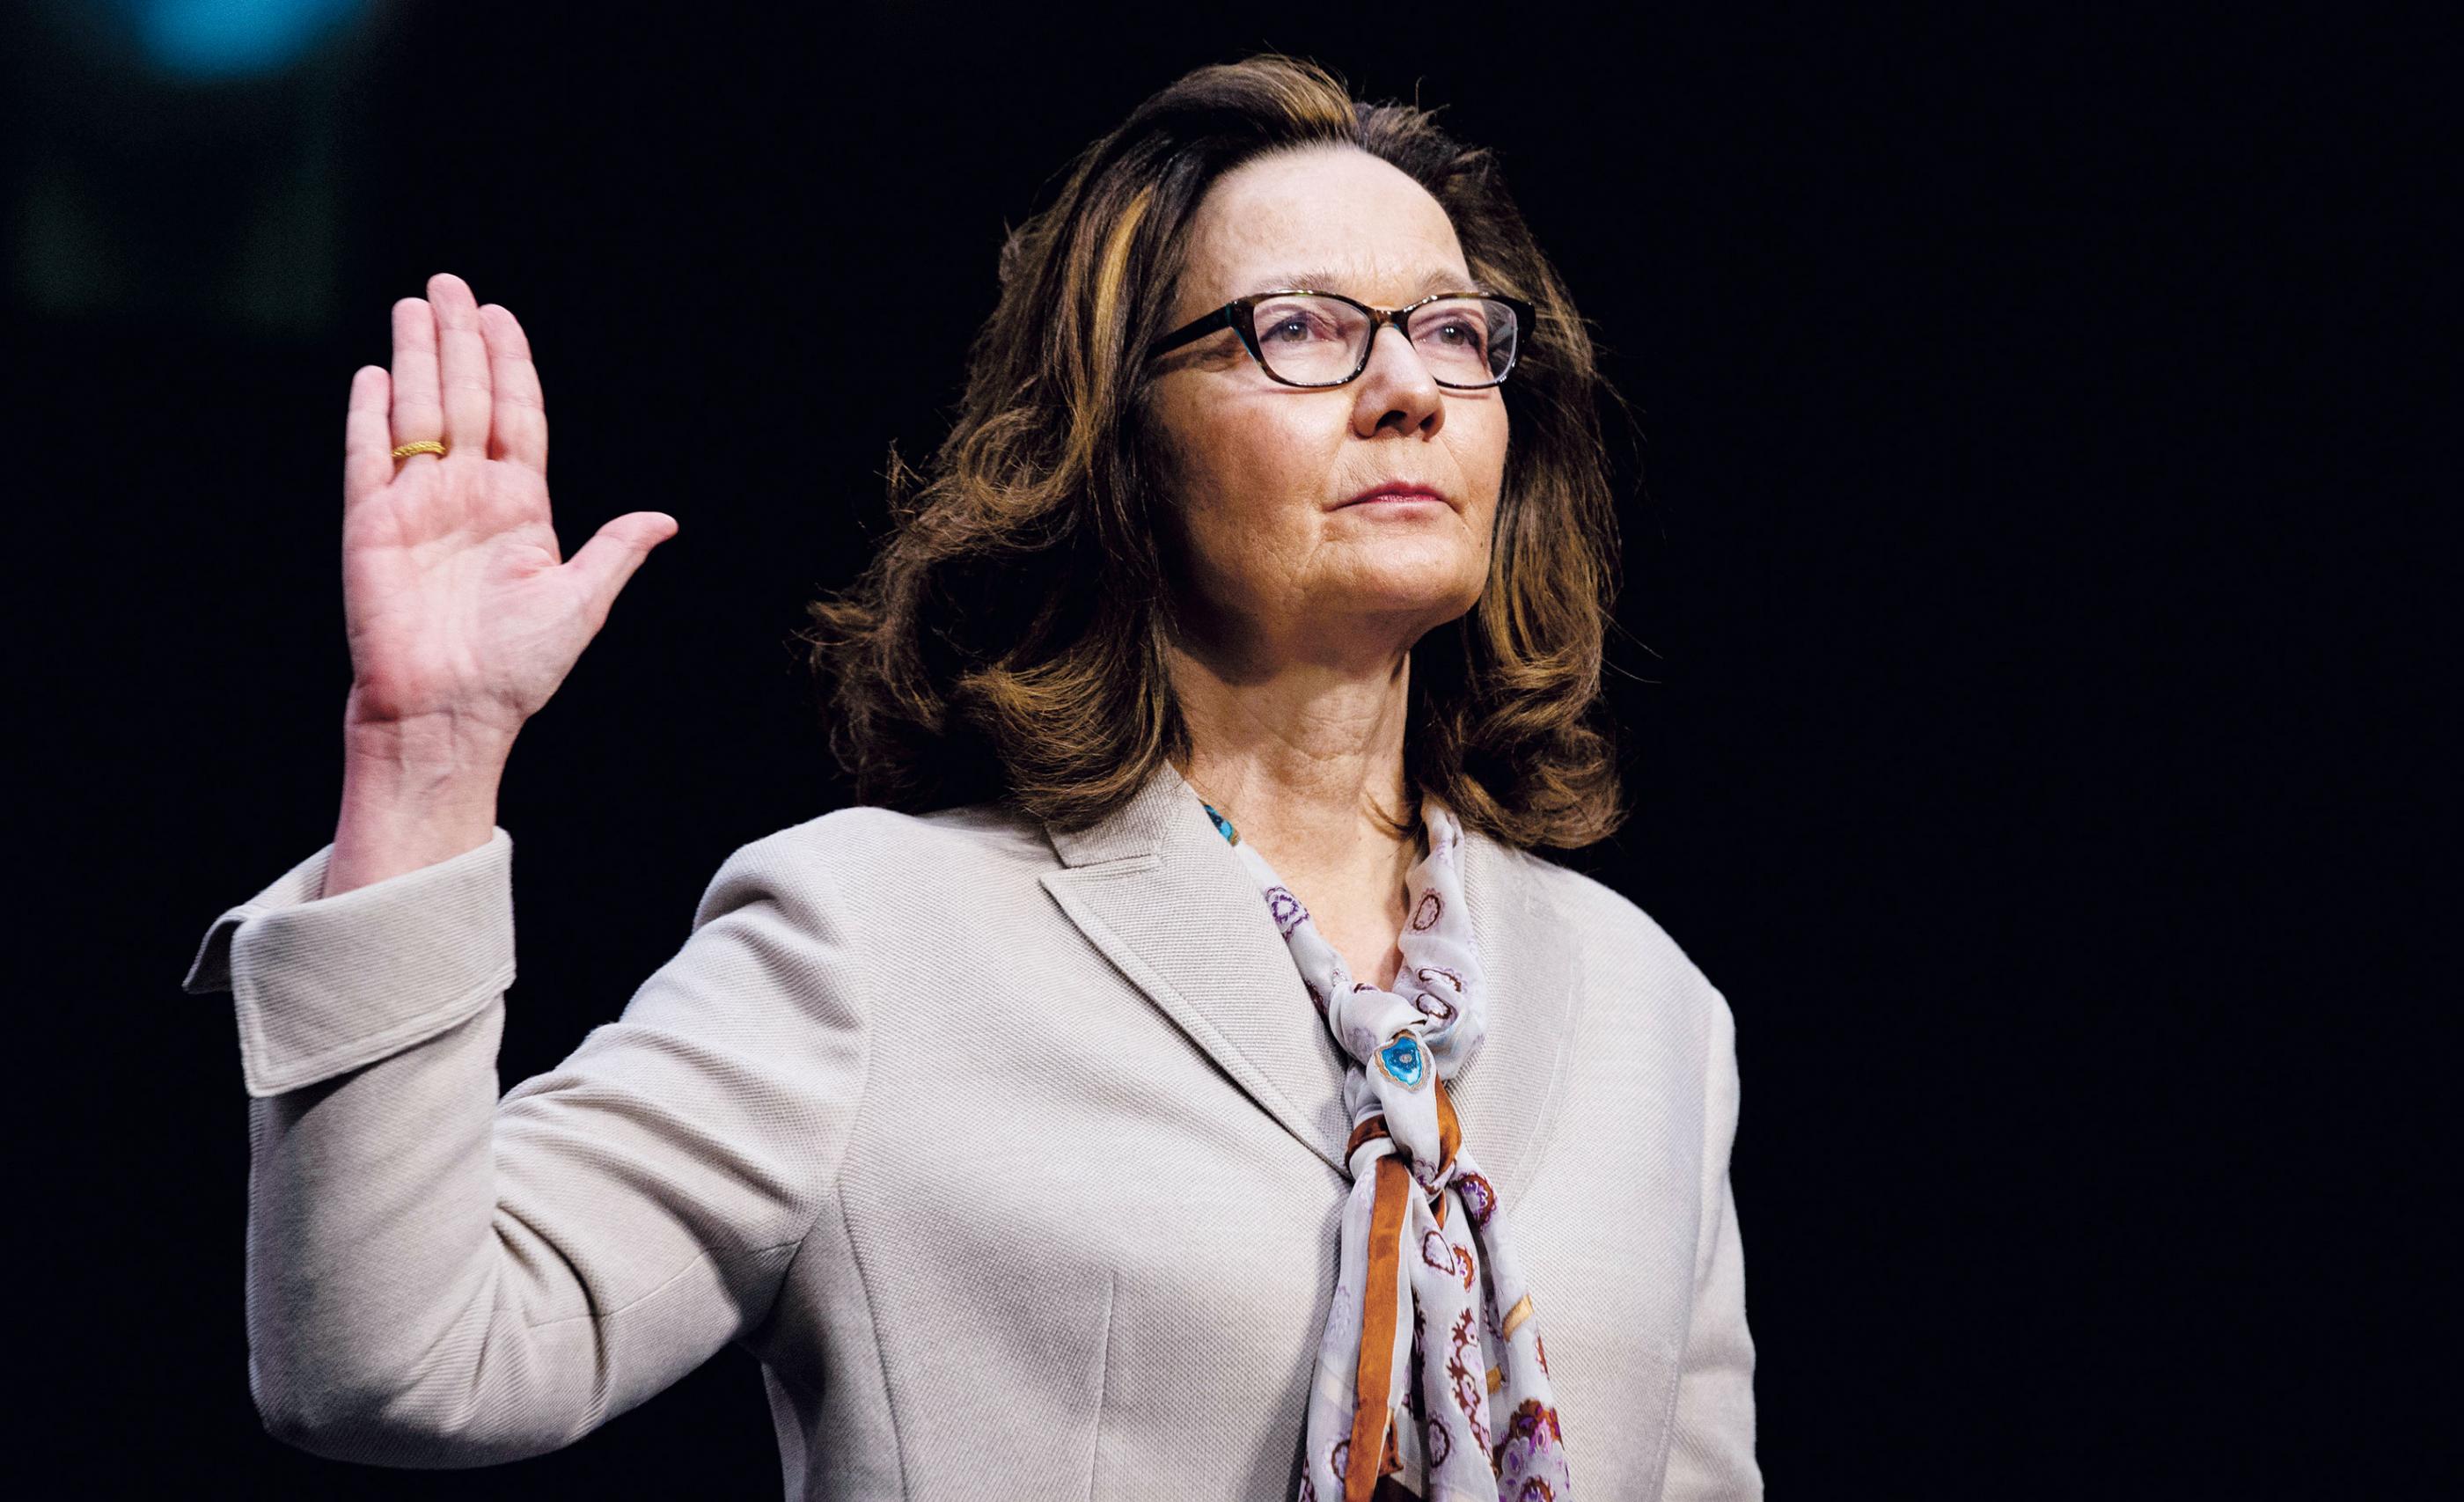 The Real Fake News: Haspel Shatters Glass Ceiling With Ice Pick